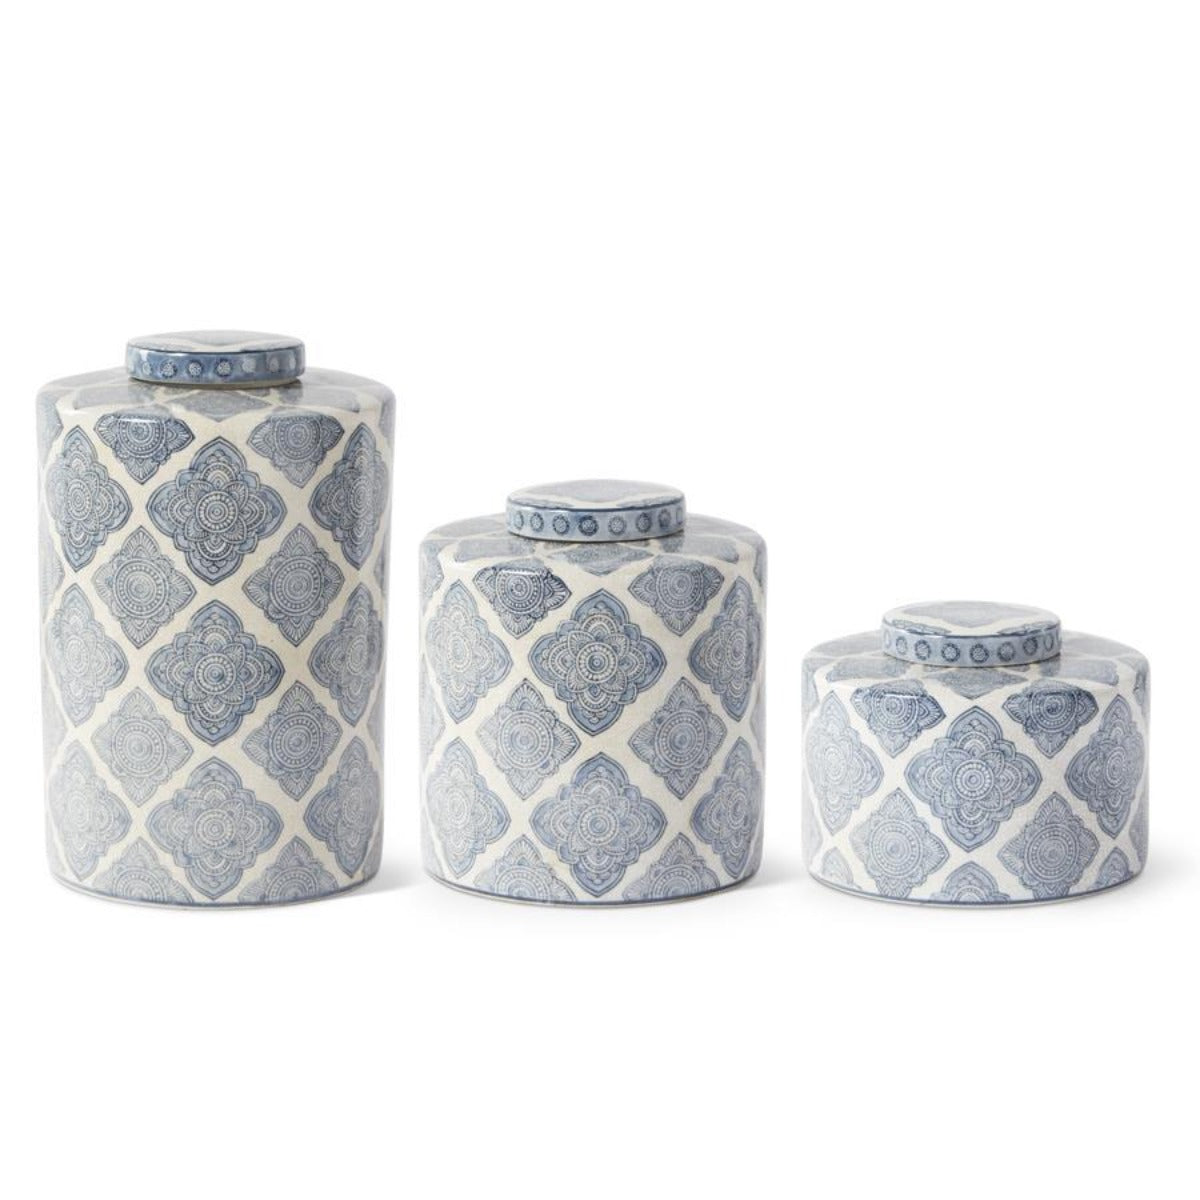 Blue & White Quartrafoil Pattern Containers With Lids